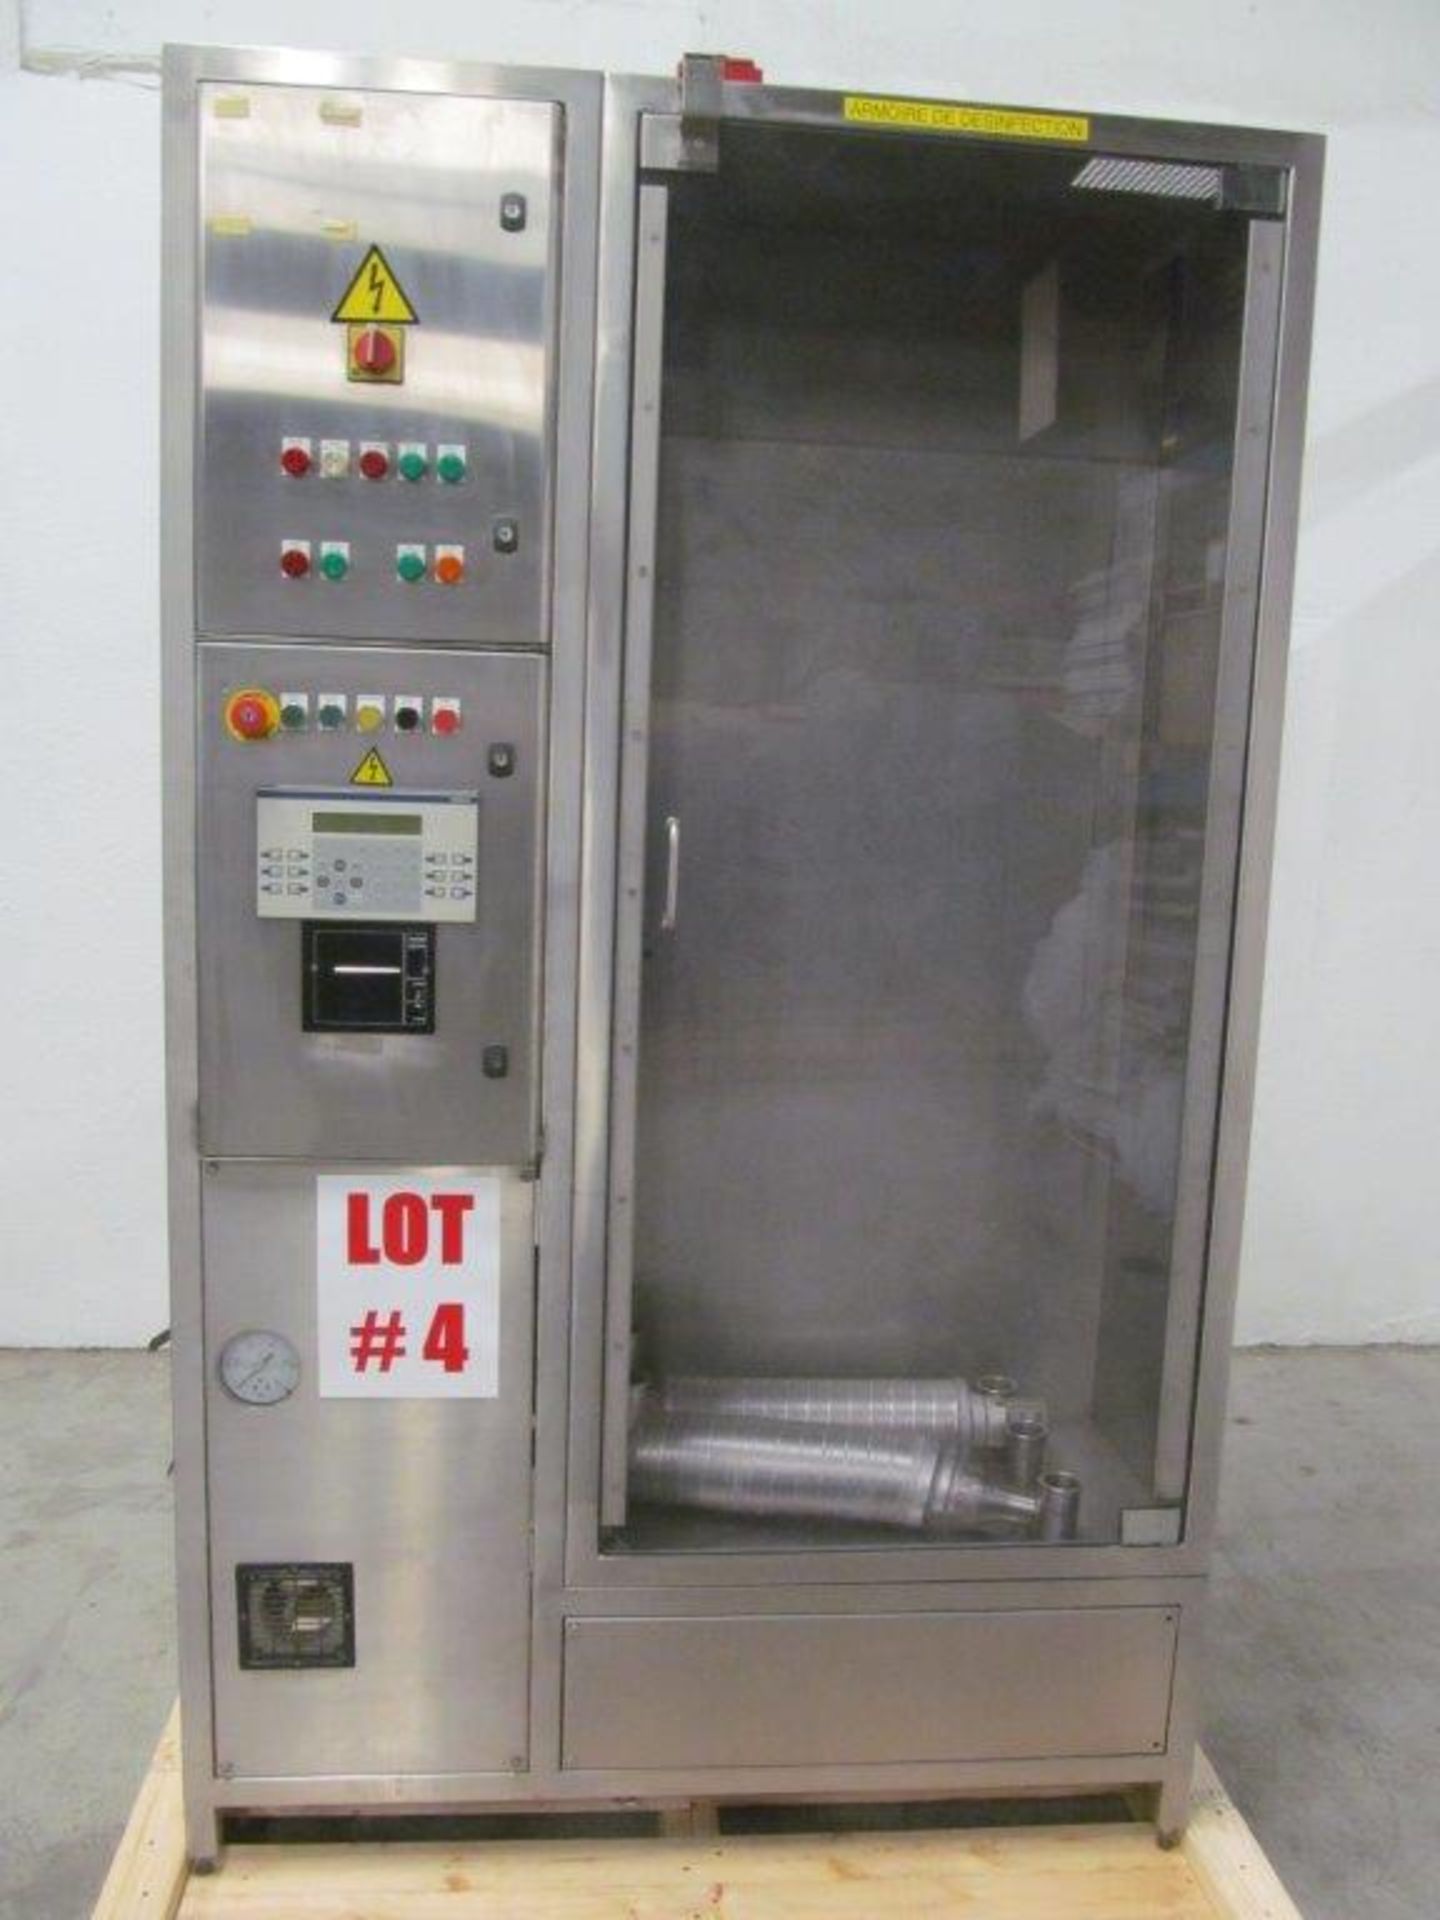 SOLERI THERMAL DESINFECTION CABINET, 200 HOURS, YEAR: 1999, 170 VOLTS, DIMENSION: 4X3X8, WEIGHT: 800